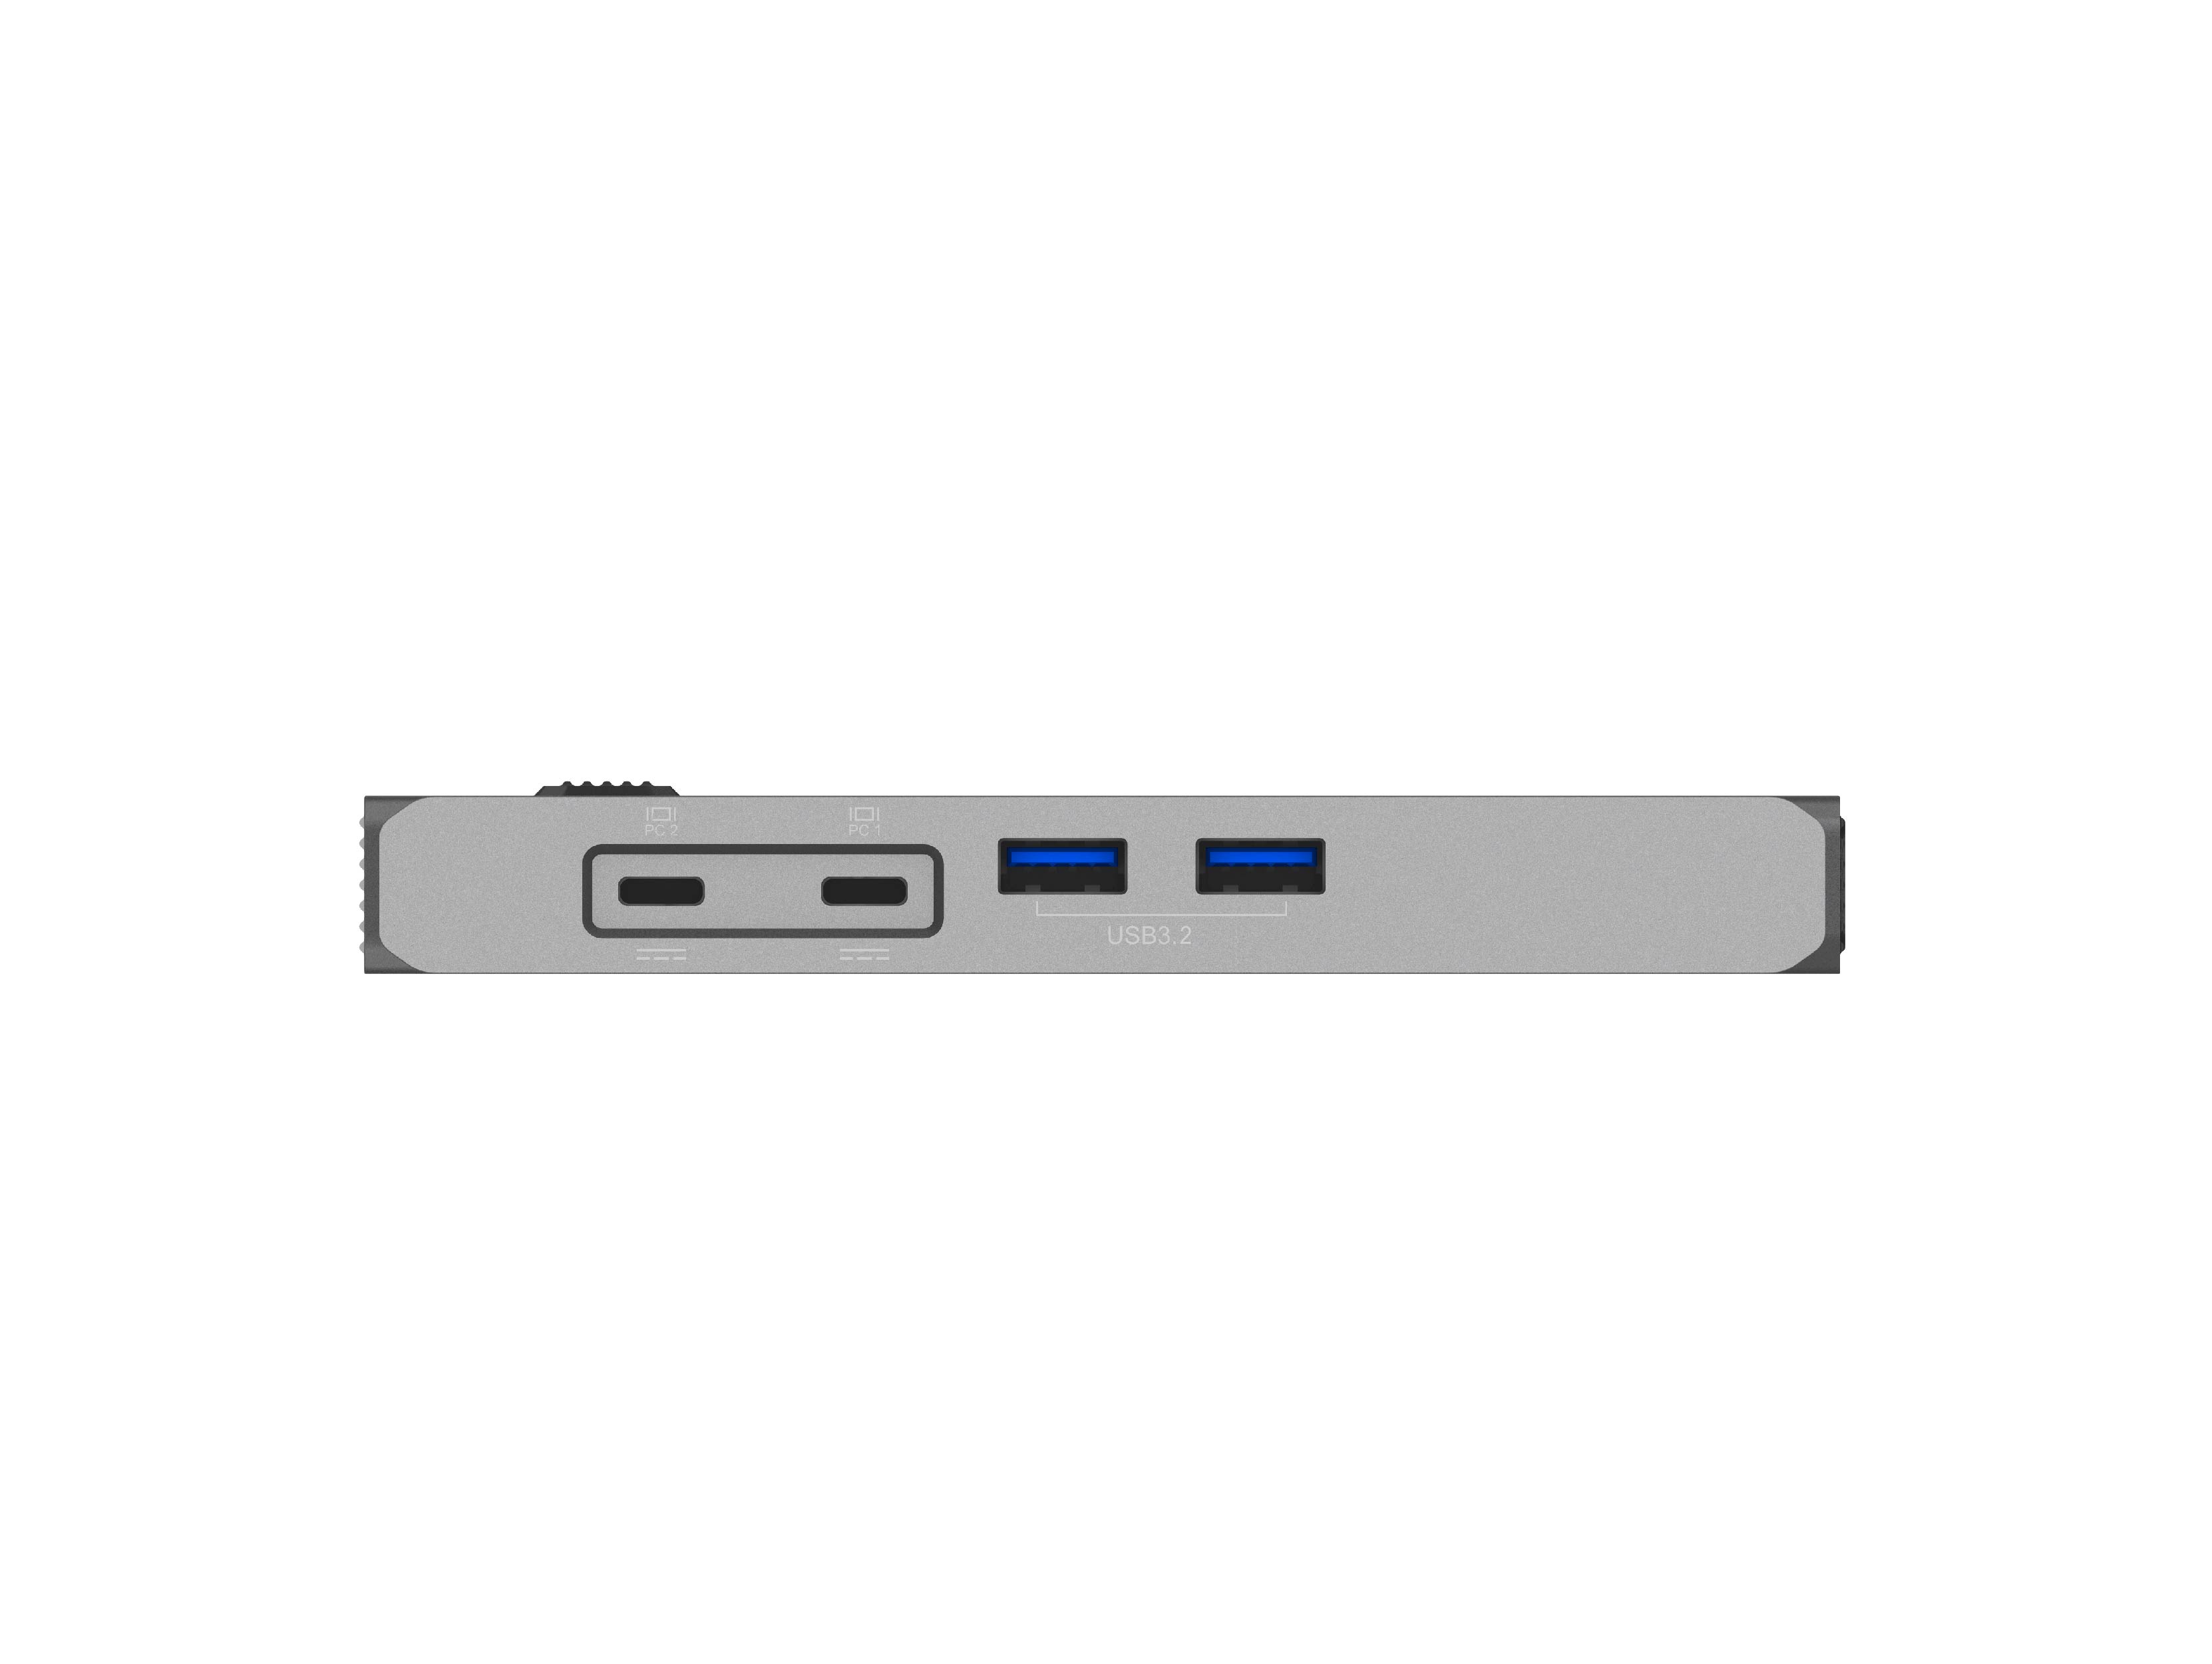 2 to 2 USB-C KVM Dock (SI-9923KVM), 2-Port USB-C KVM, One button to switch the input source for PC1/2, Supports HDMI1.4 4K@30Hz output.